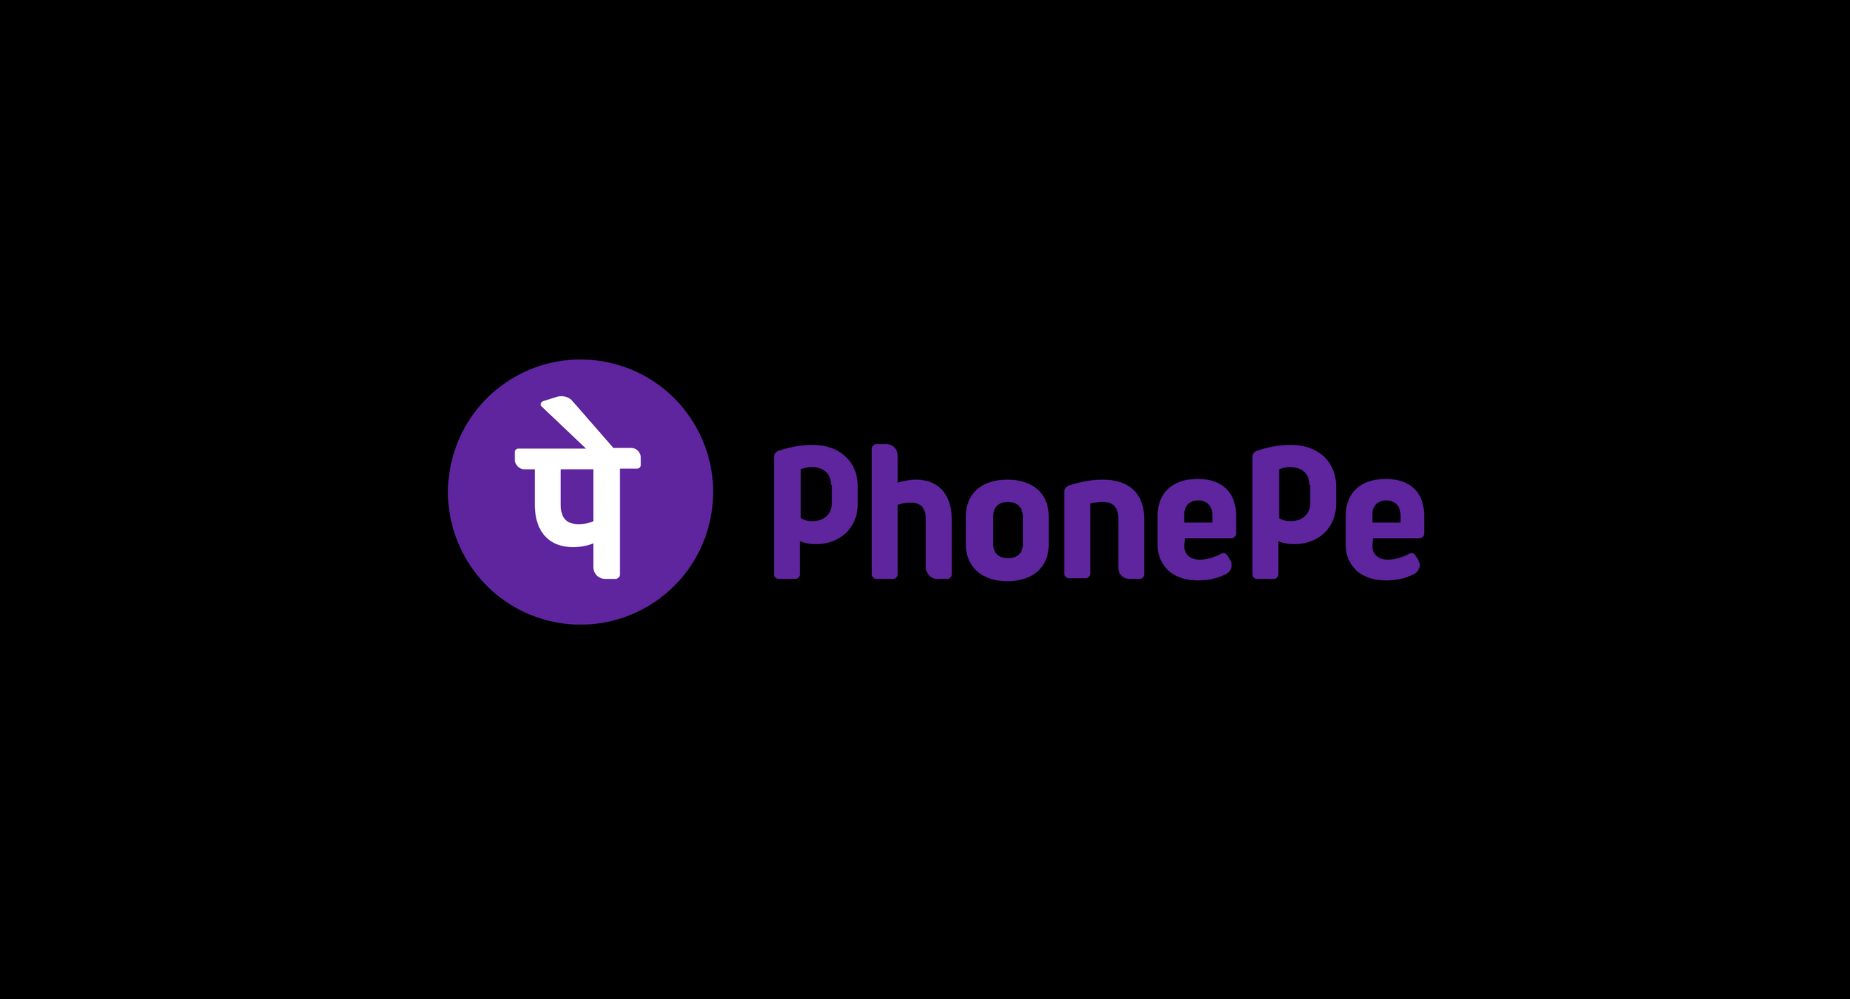 GitHub - PhonePe/phonepe-php: PhonePe PHP Merchant Client Library